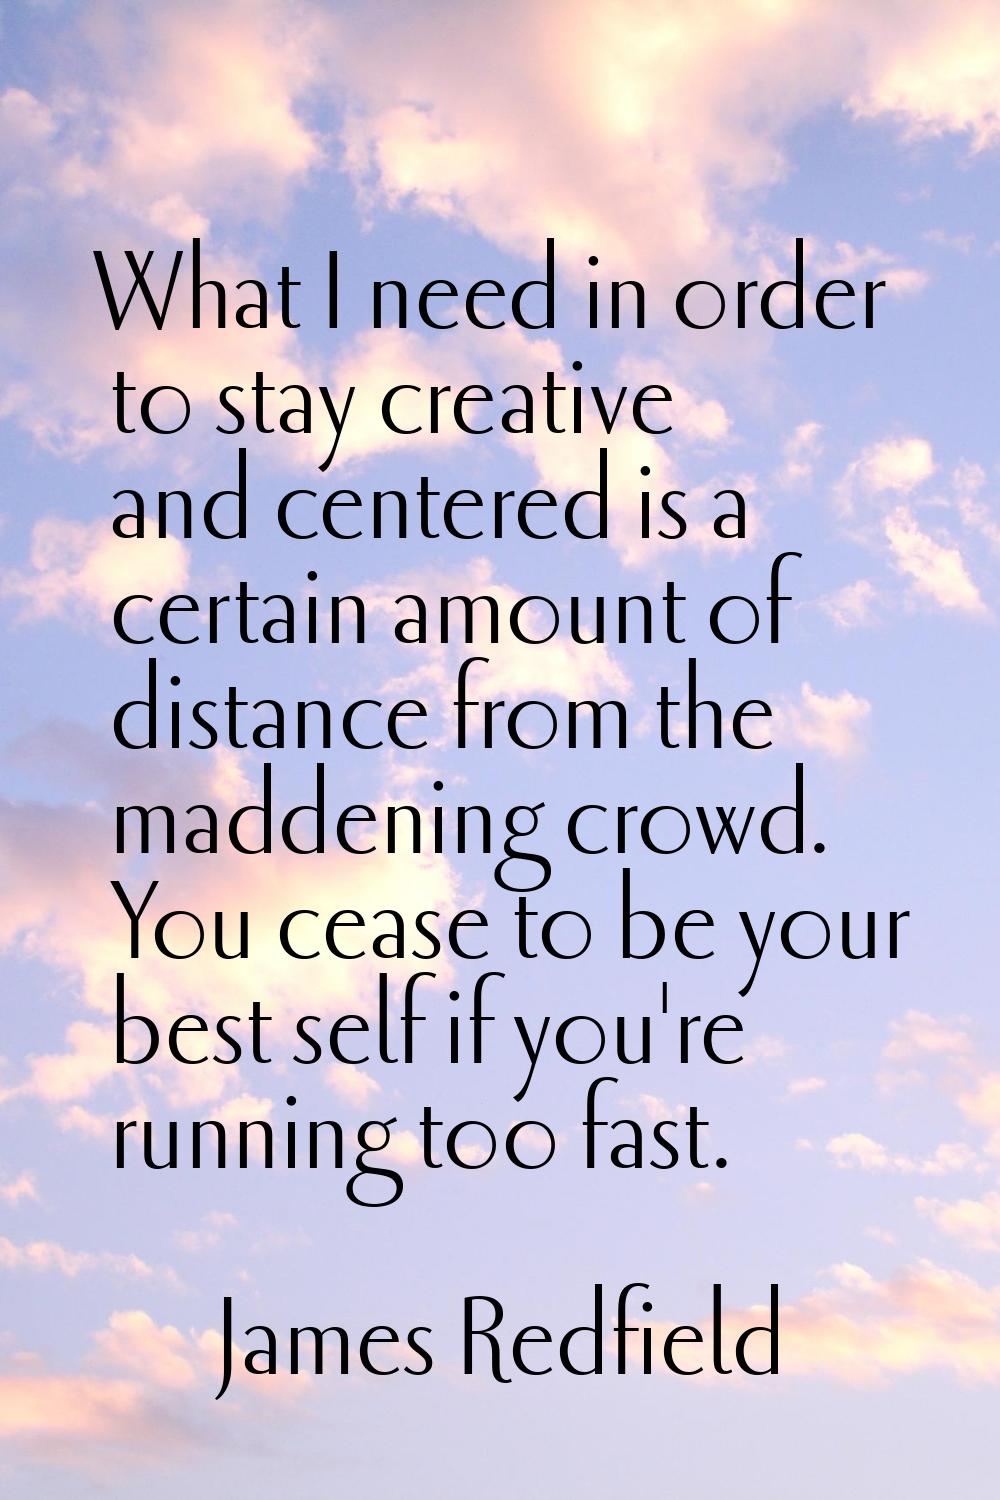 What I need in order to stay creative and centered is a certain amount of distance from the maddeni